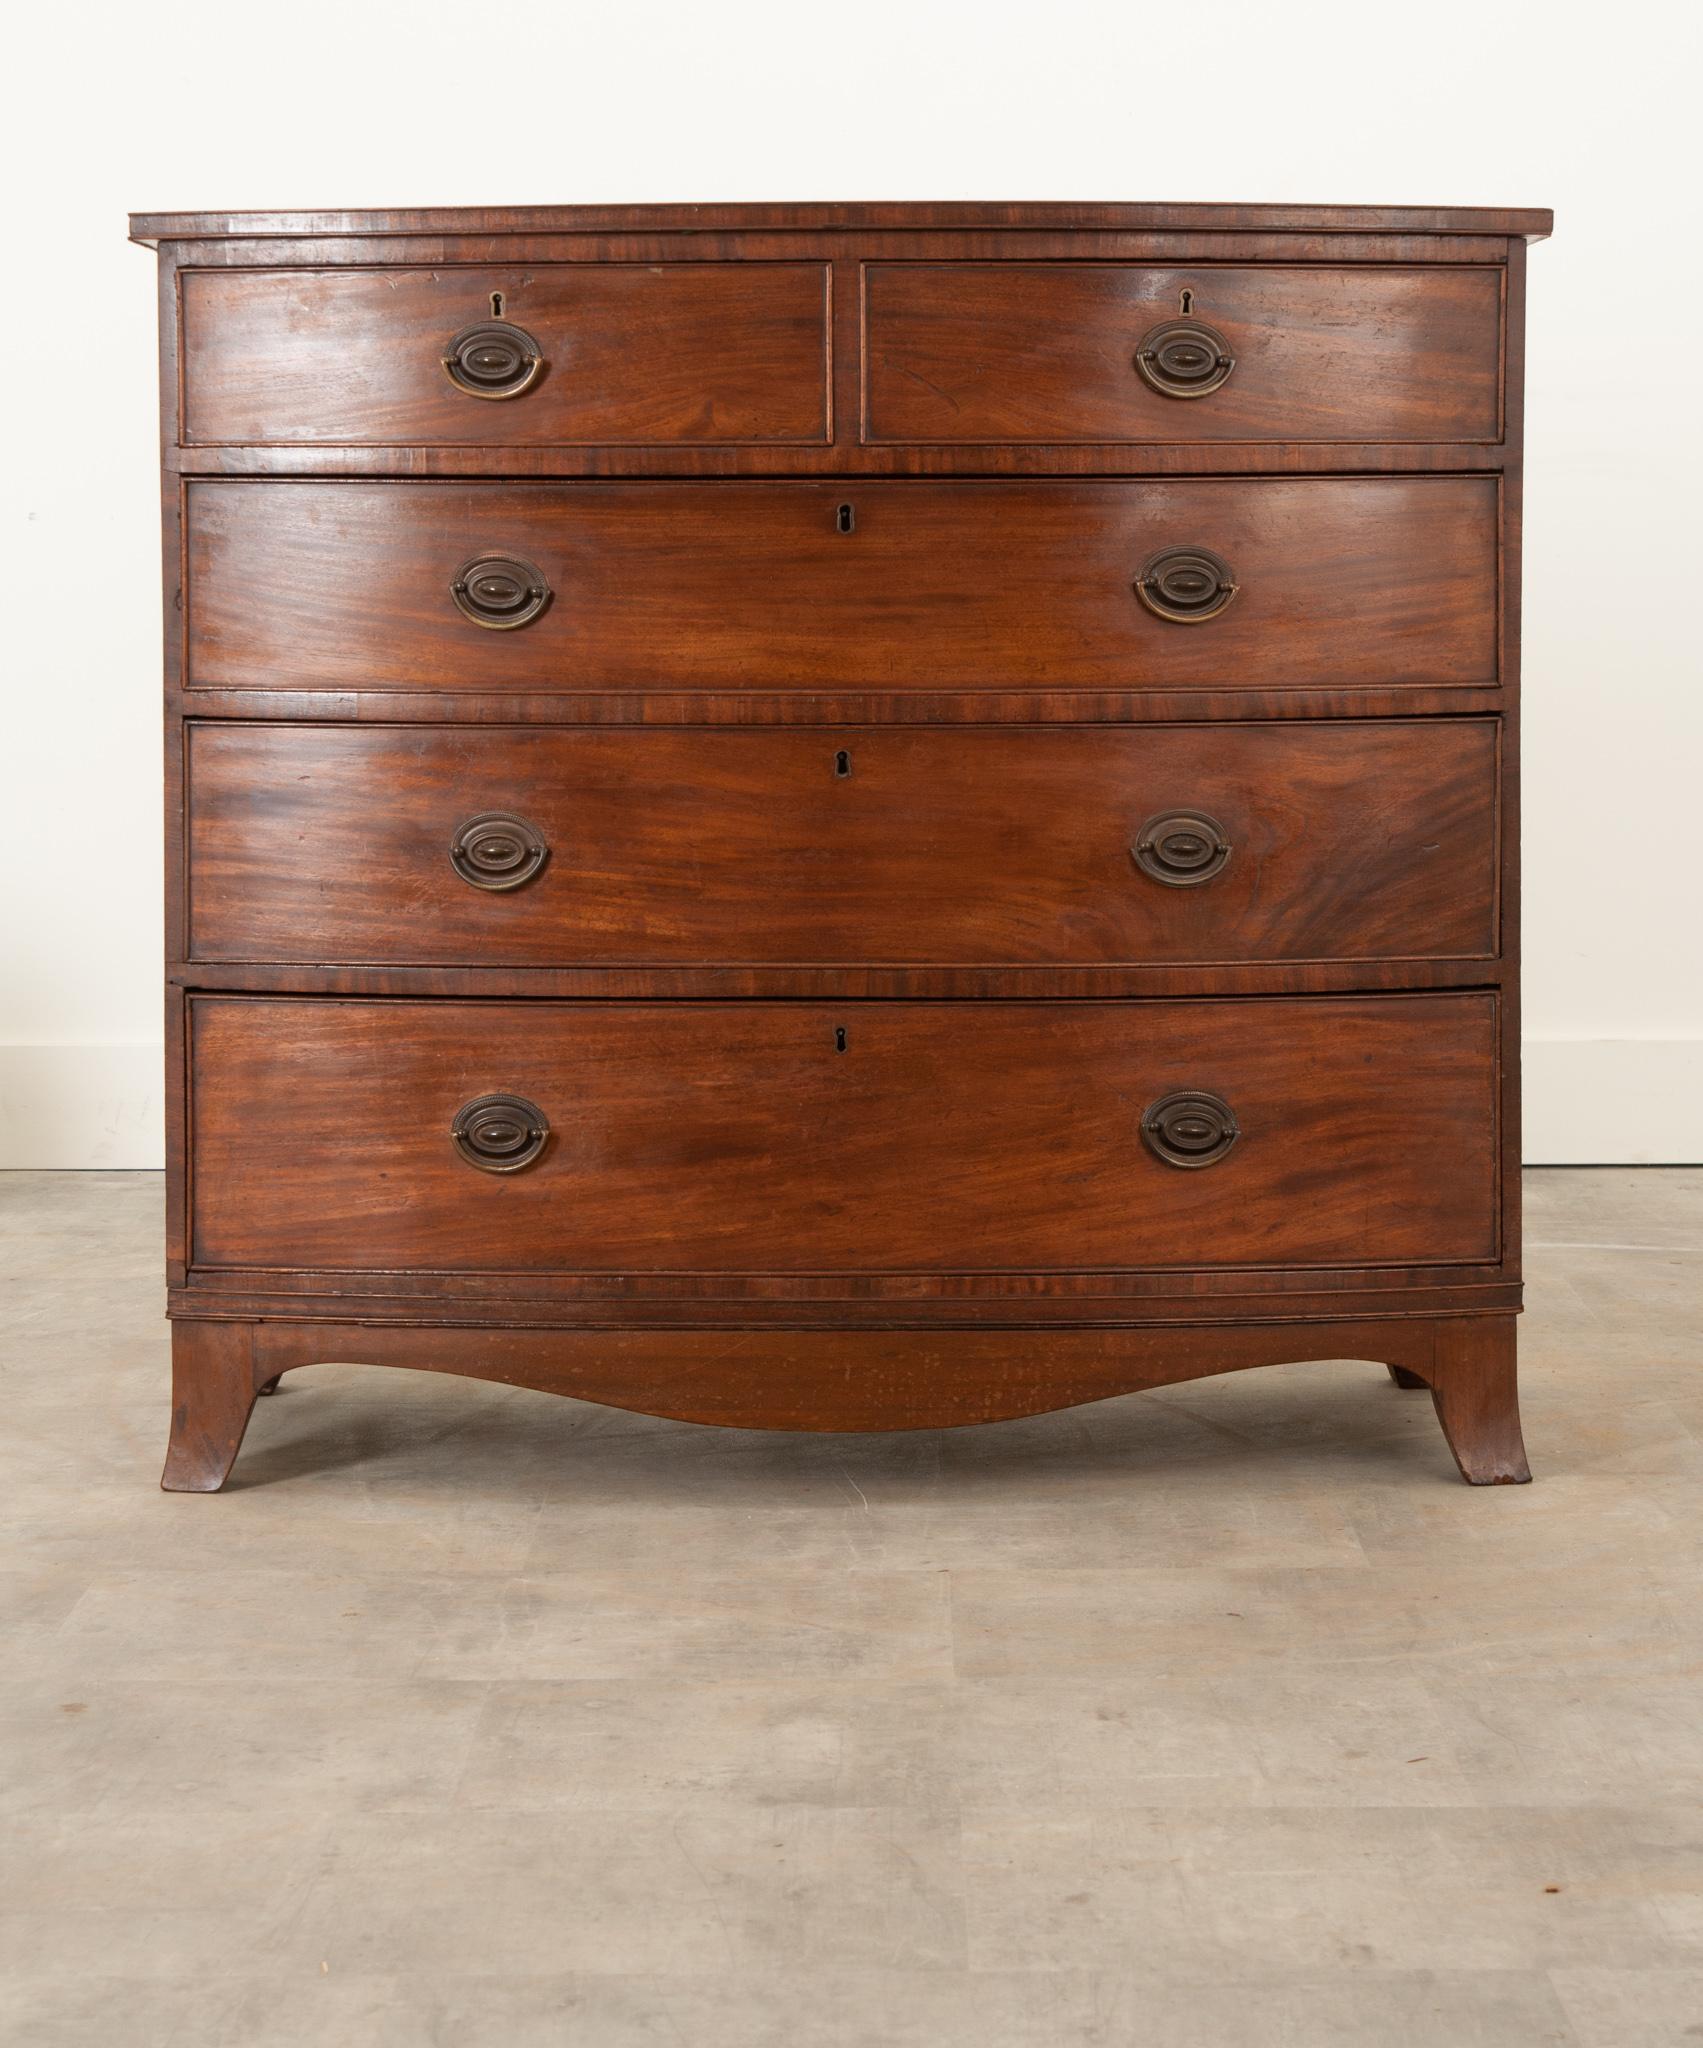 A handsome Dutch chest of drawers from the 19th century. Crafted from oak, it’s gained a fine patina over the years and is in wonderful antique condition. This bow front chest contains five drawers, all of which have been recently cleaned and easily